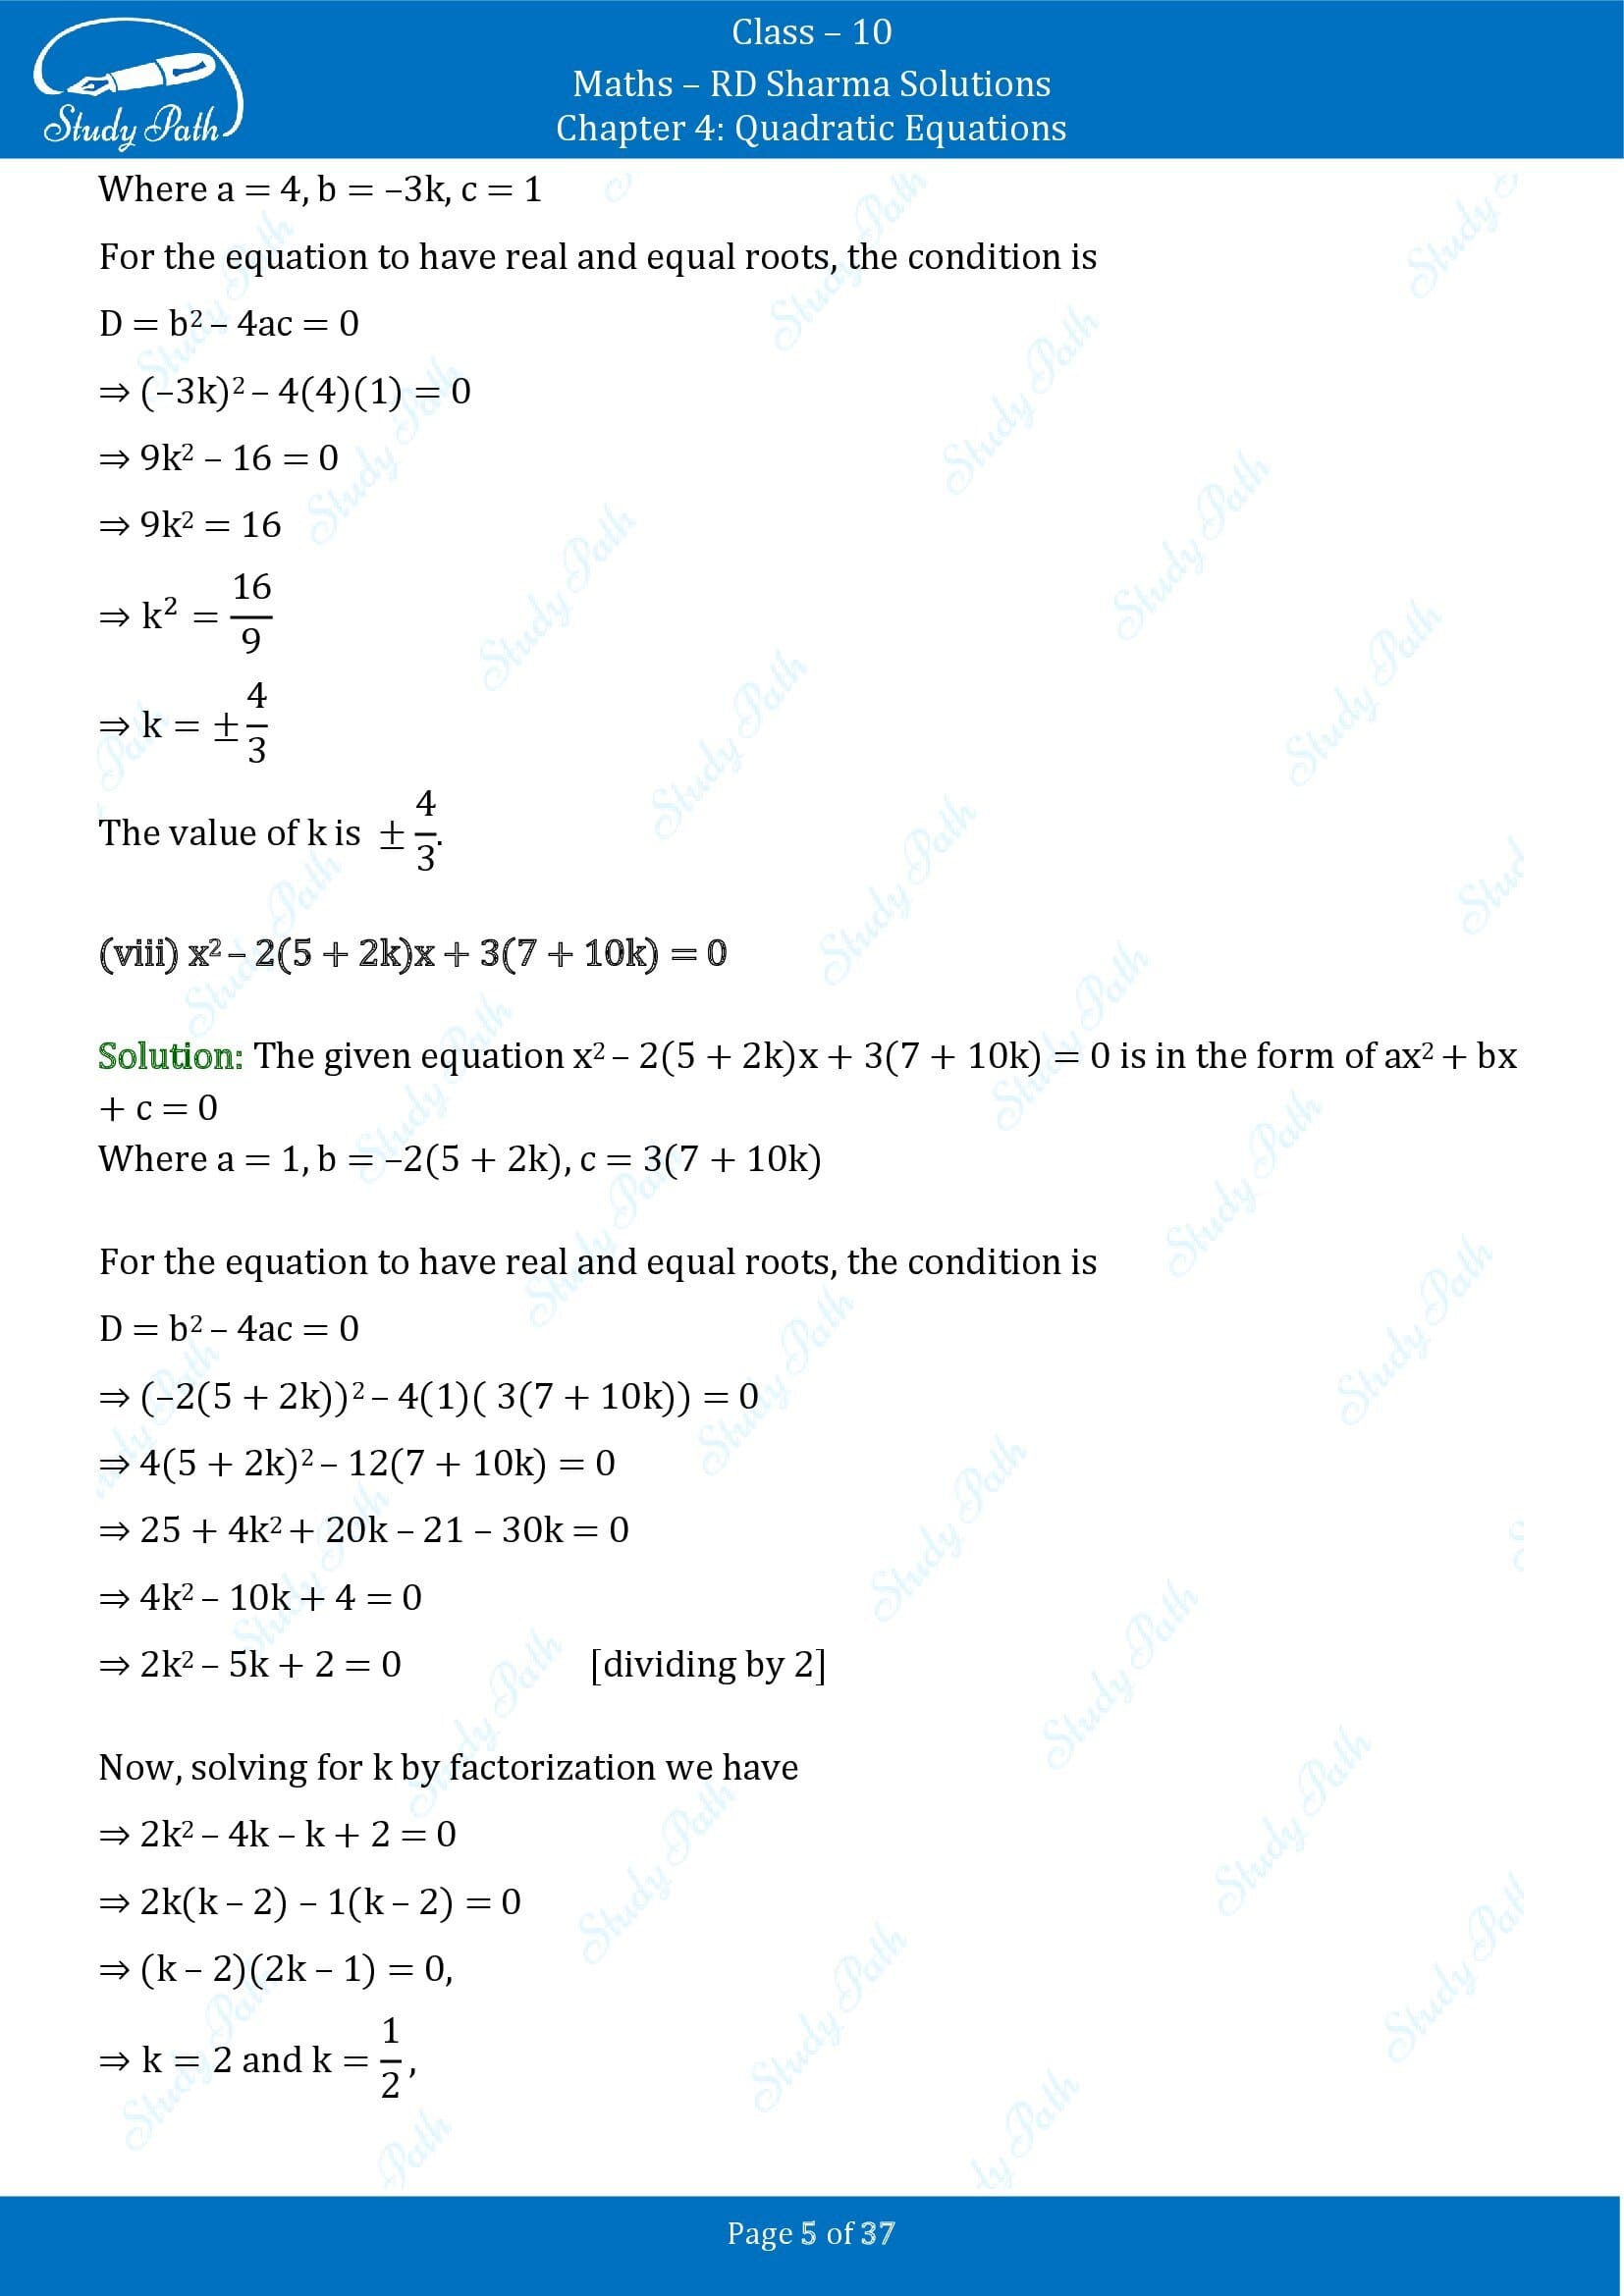 RD Sharma Solutions Class 10 Chapter 4 Quadratic Equations Exercise 4.6 00005